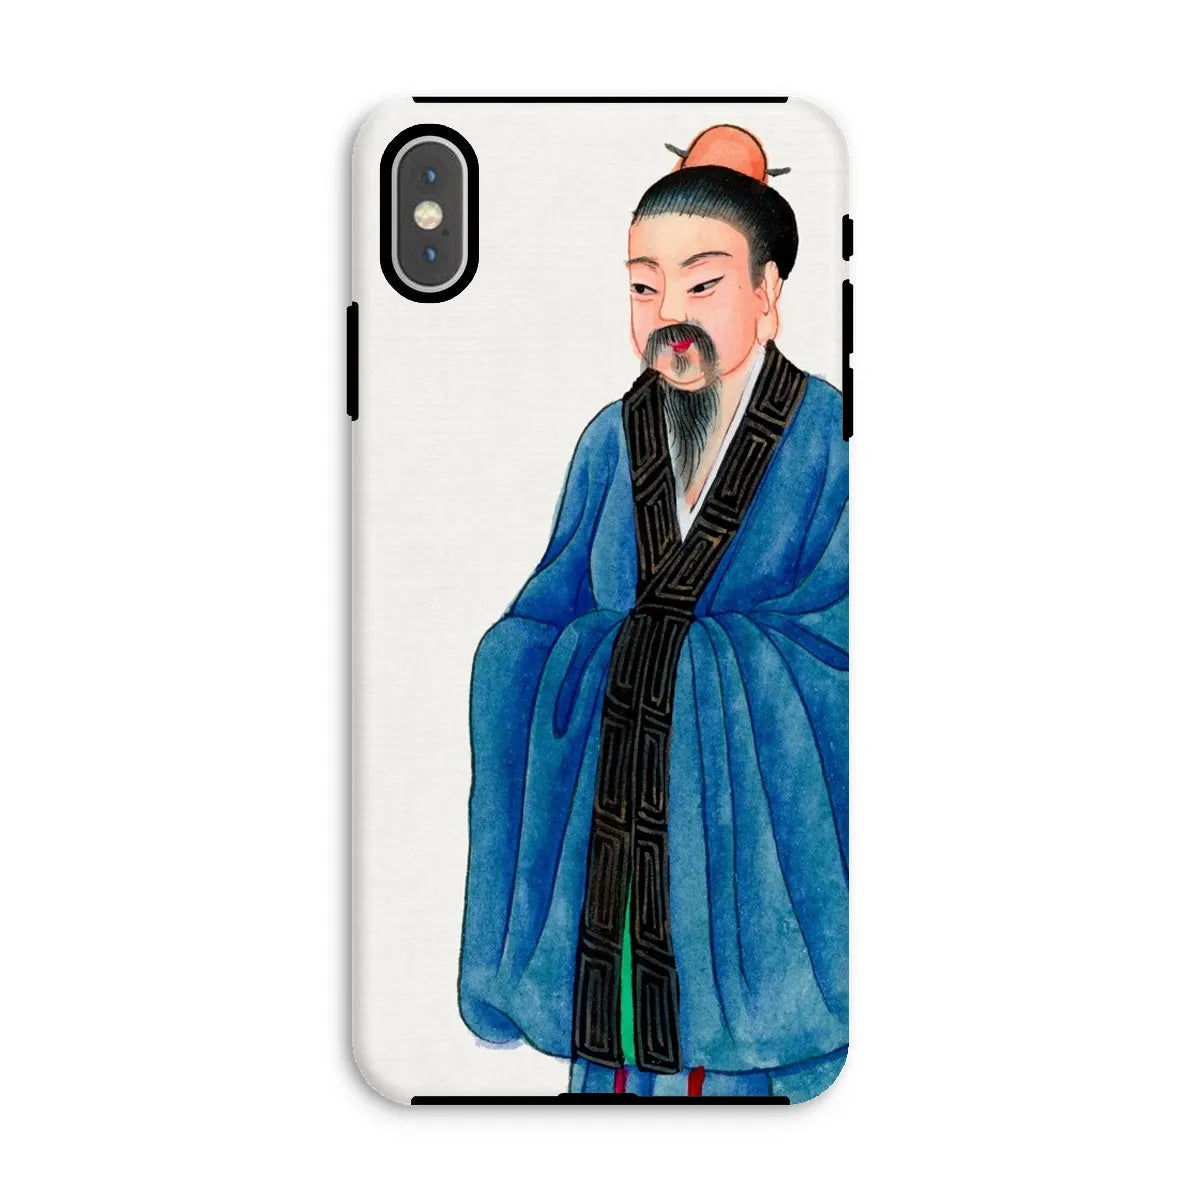 Grand Master - Chinese Buddhist Aesthetic Art Phone Case - Iphone Xs Max / Matte - Mobile Phone Cases - Aesthetic Art